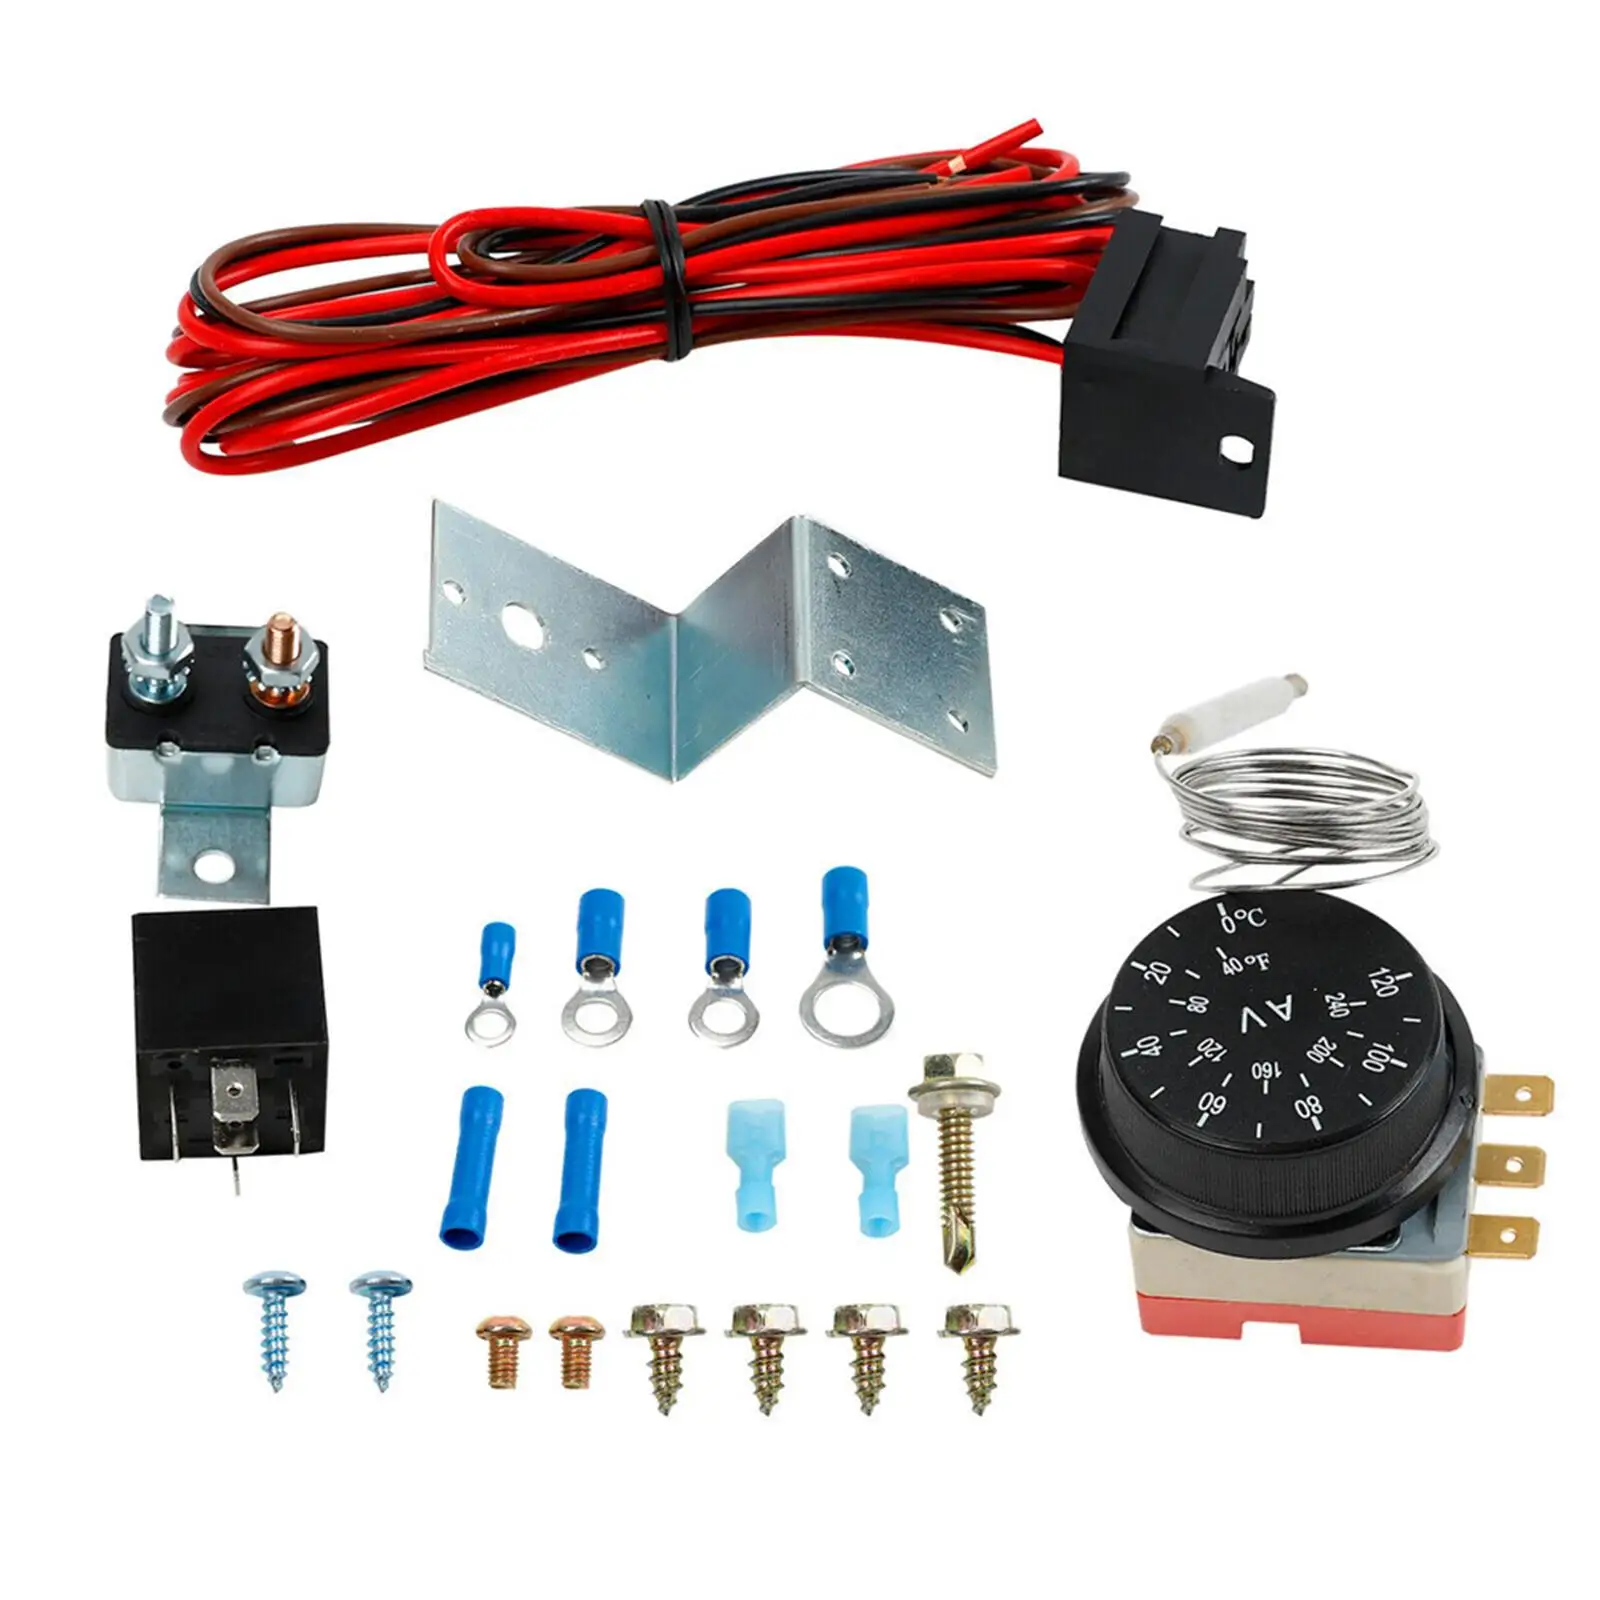 Electric 12V Adjustable Radiator Fan Thermostat Controller Relay Kit Car Truck Mounting Hardware Automobile Repairing Accessory